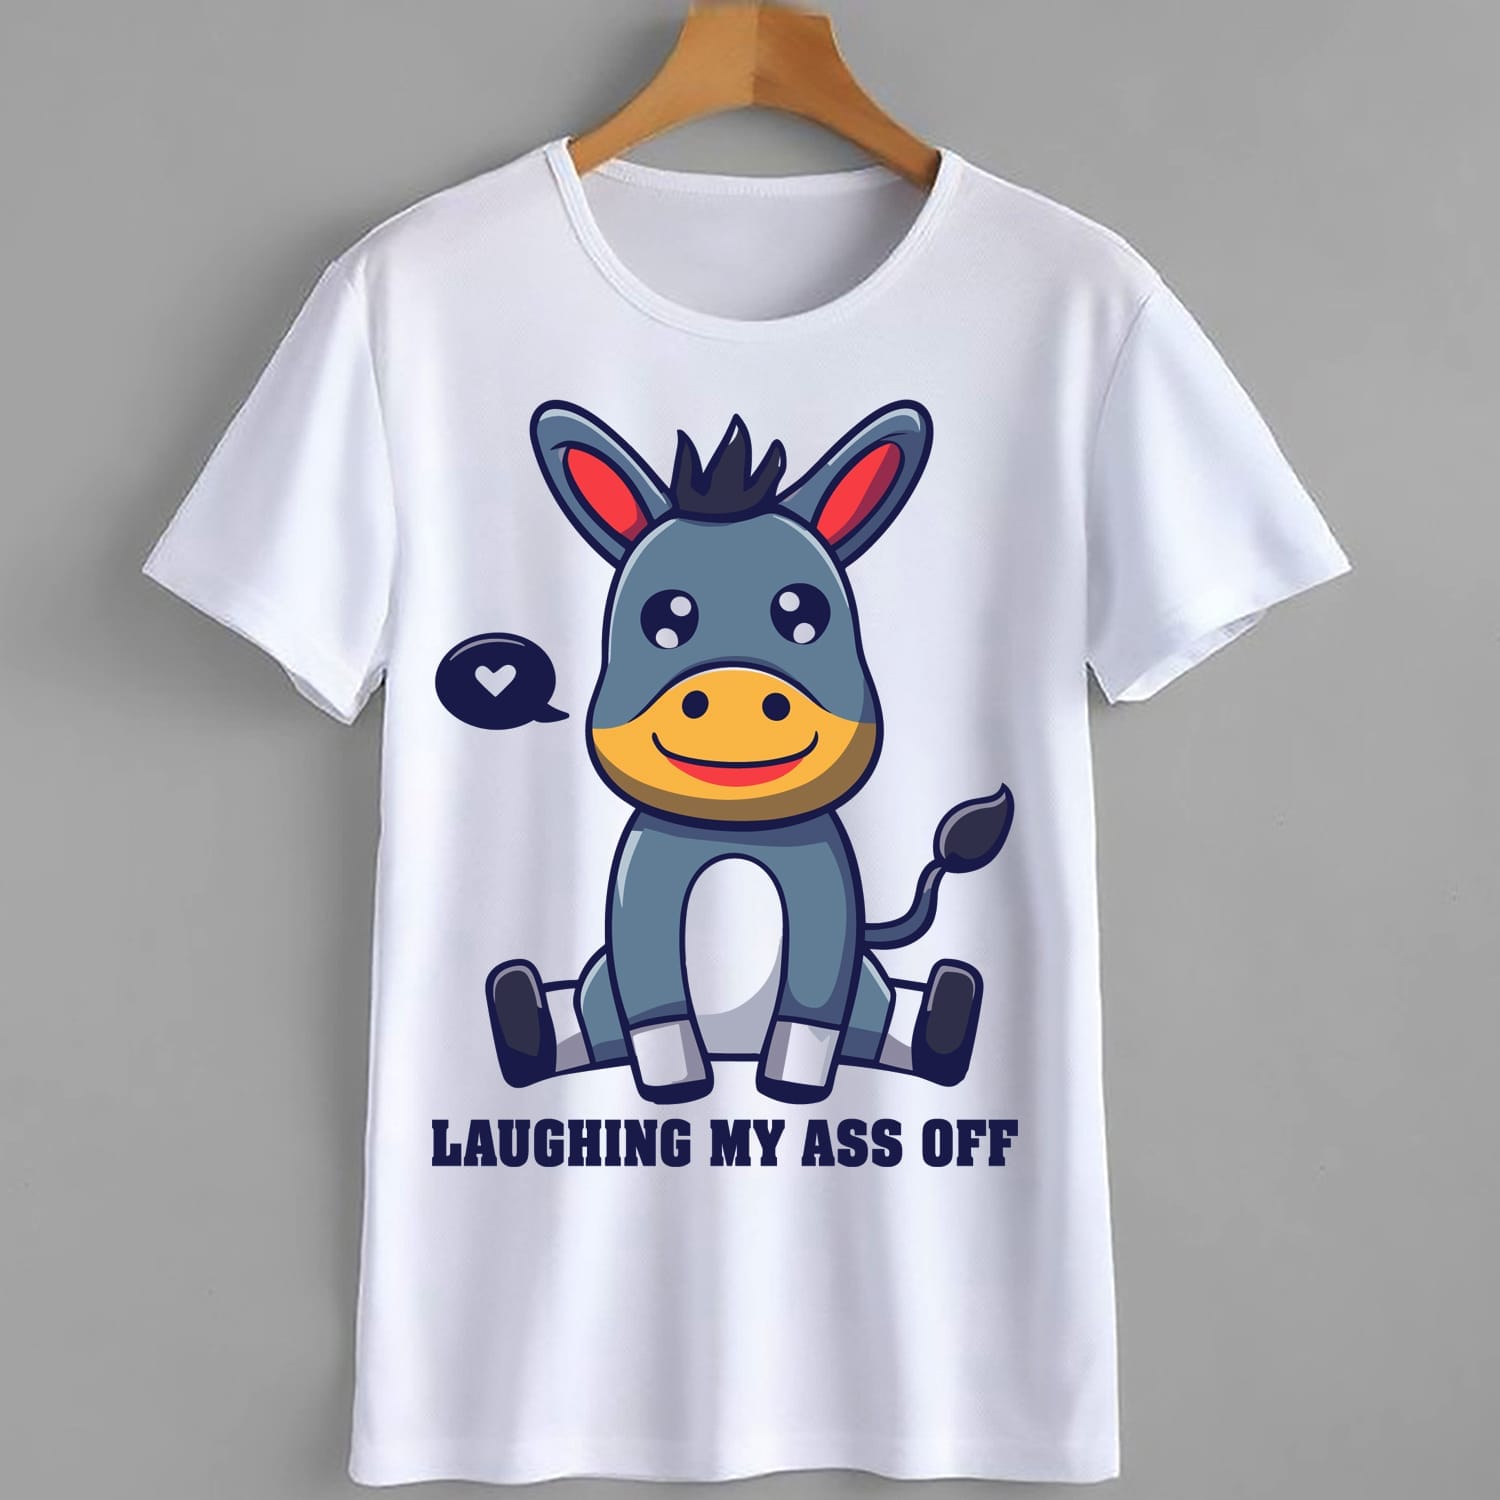 Laughing My Ass Off - Funny T-Shirt Design